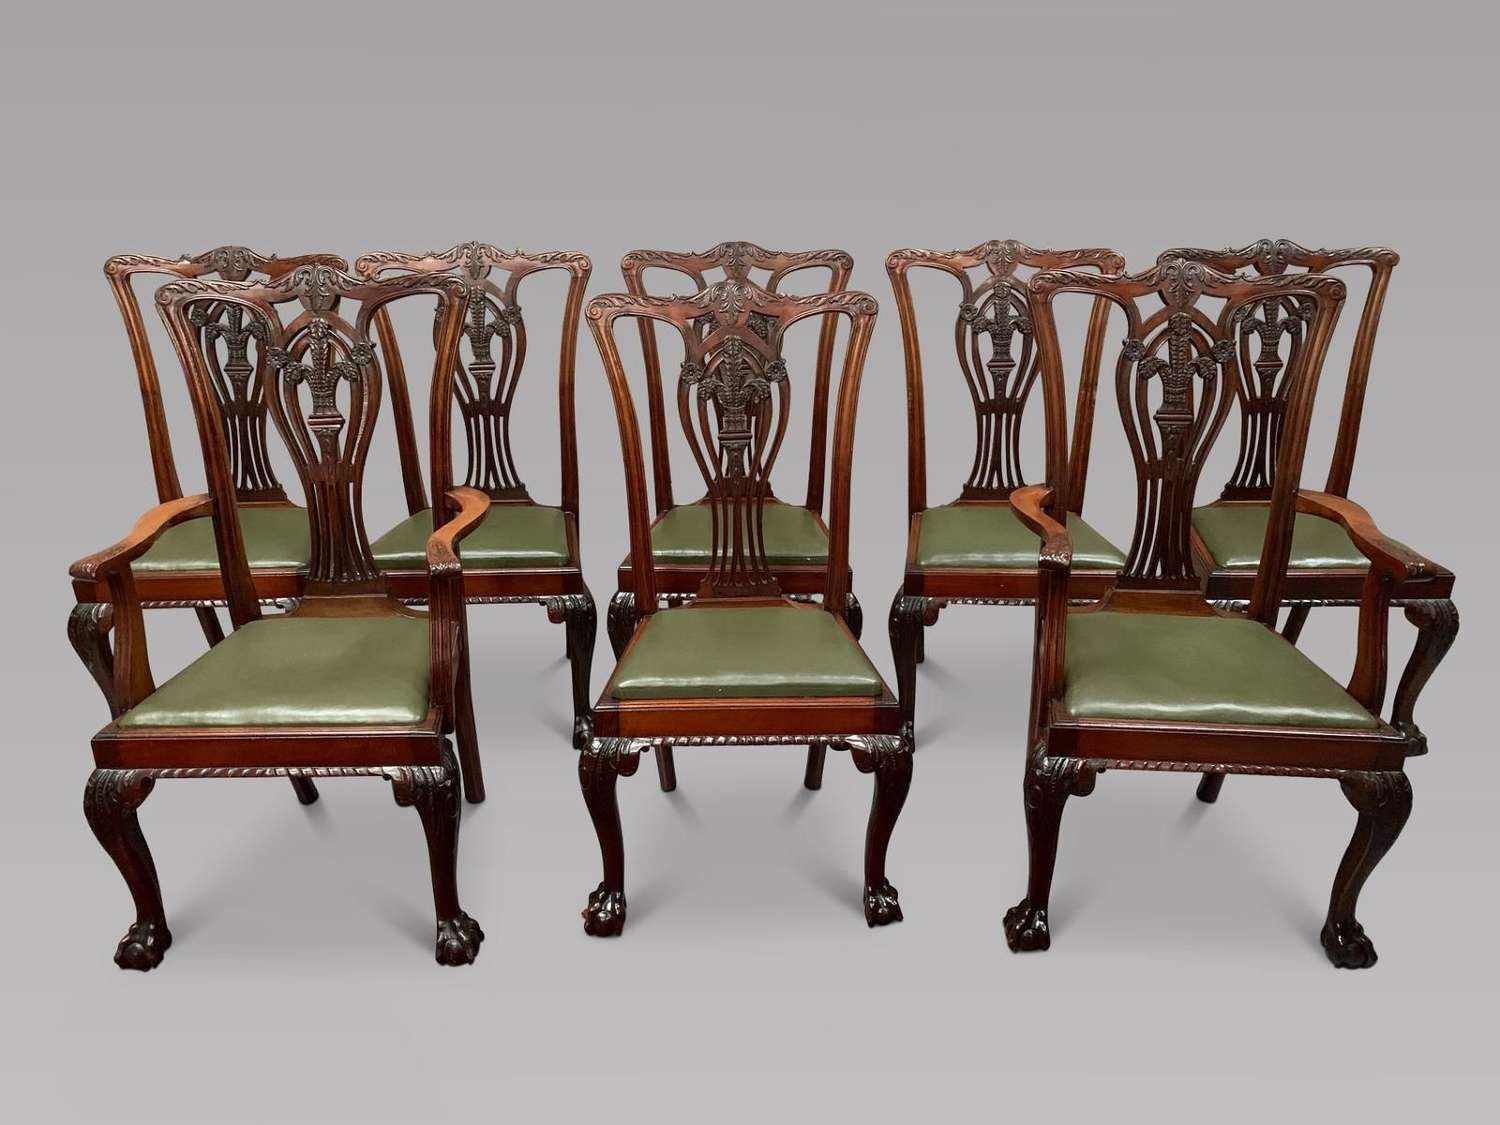 Set of Eight Mahogany Dining Chairs c.1870